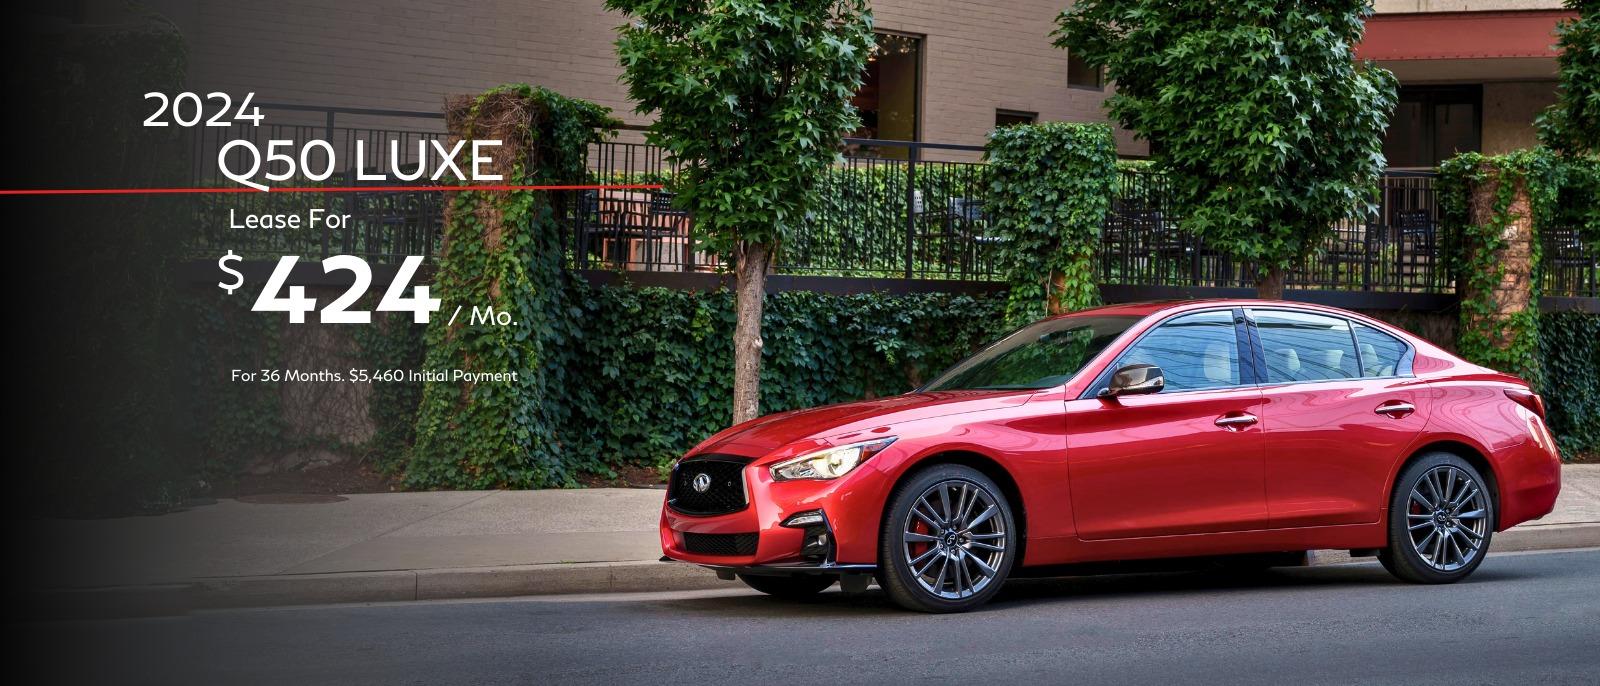 2024 Q50 Luxe  Lease 36 Months - $424/Month - $5,460 initial payment.